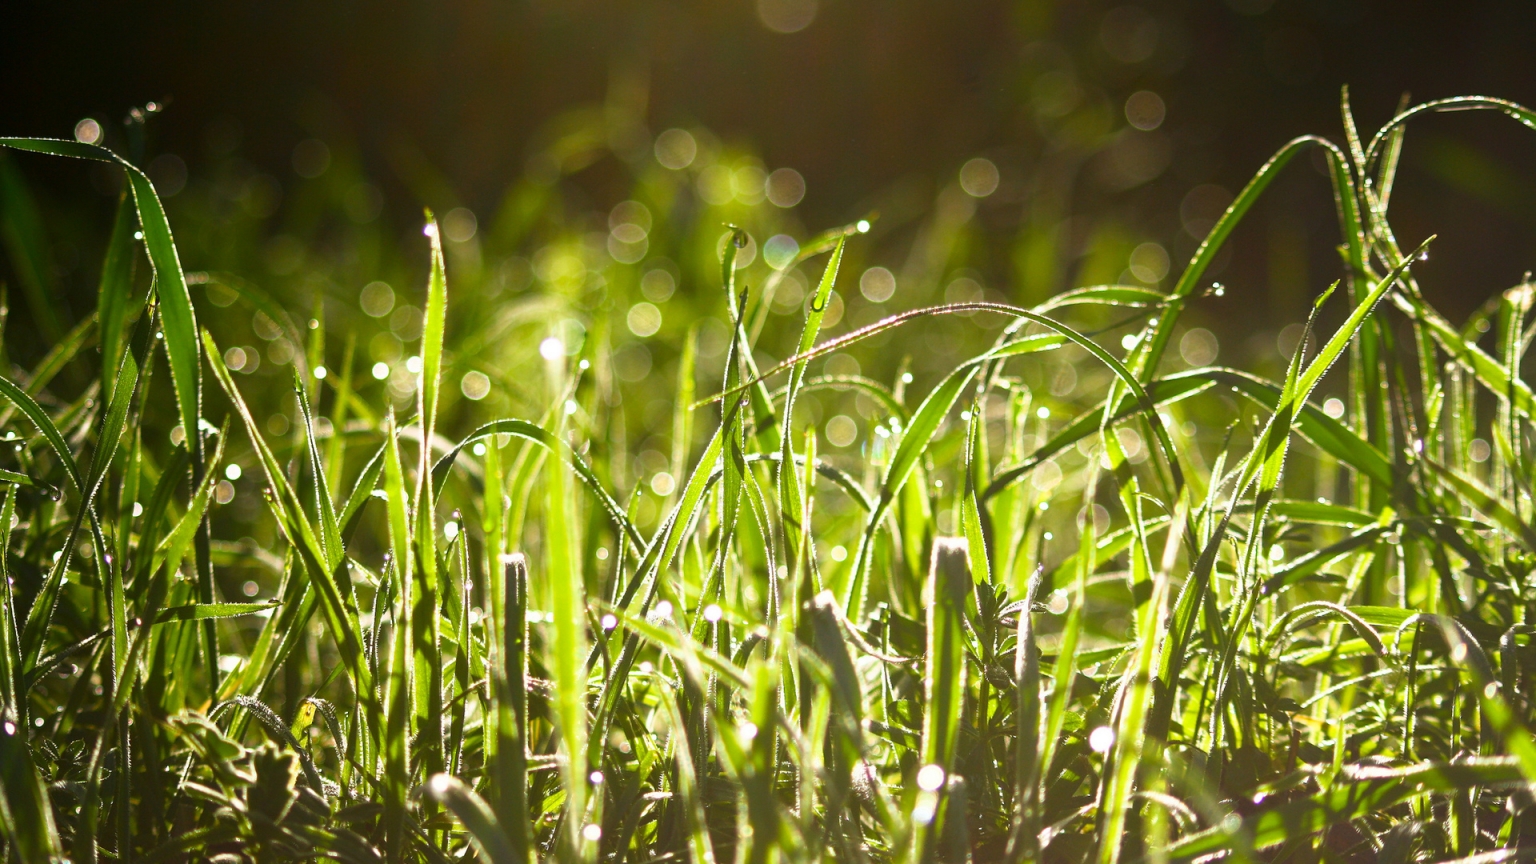 Wet Grass In The Sun  for 1536 x 864 HDTV resolution